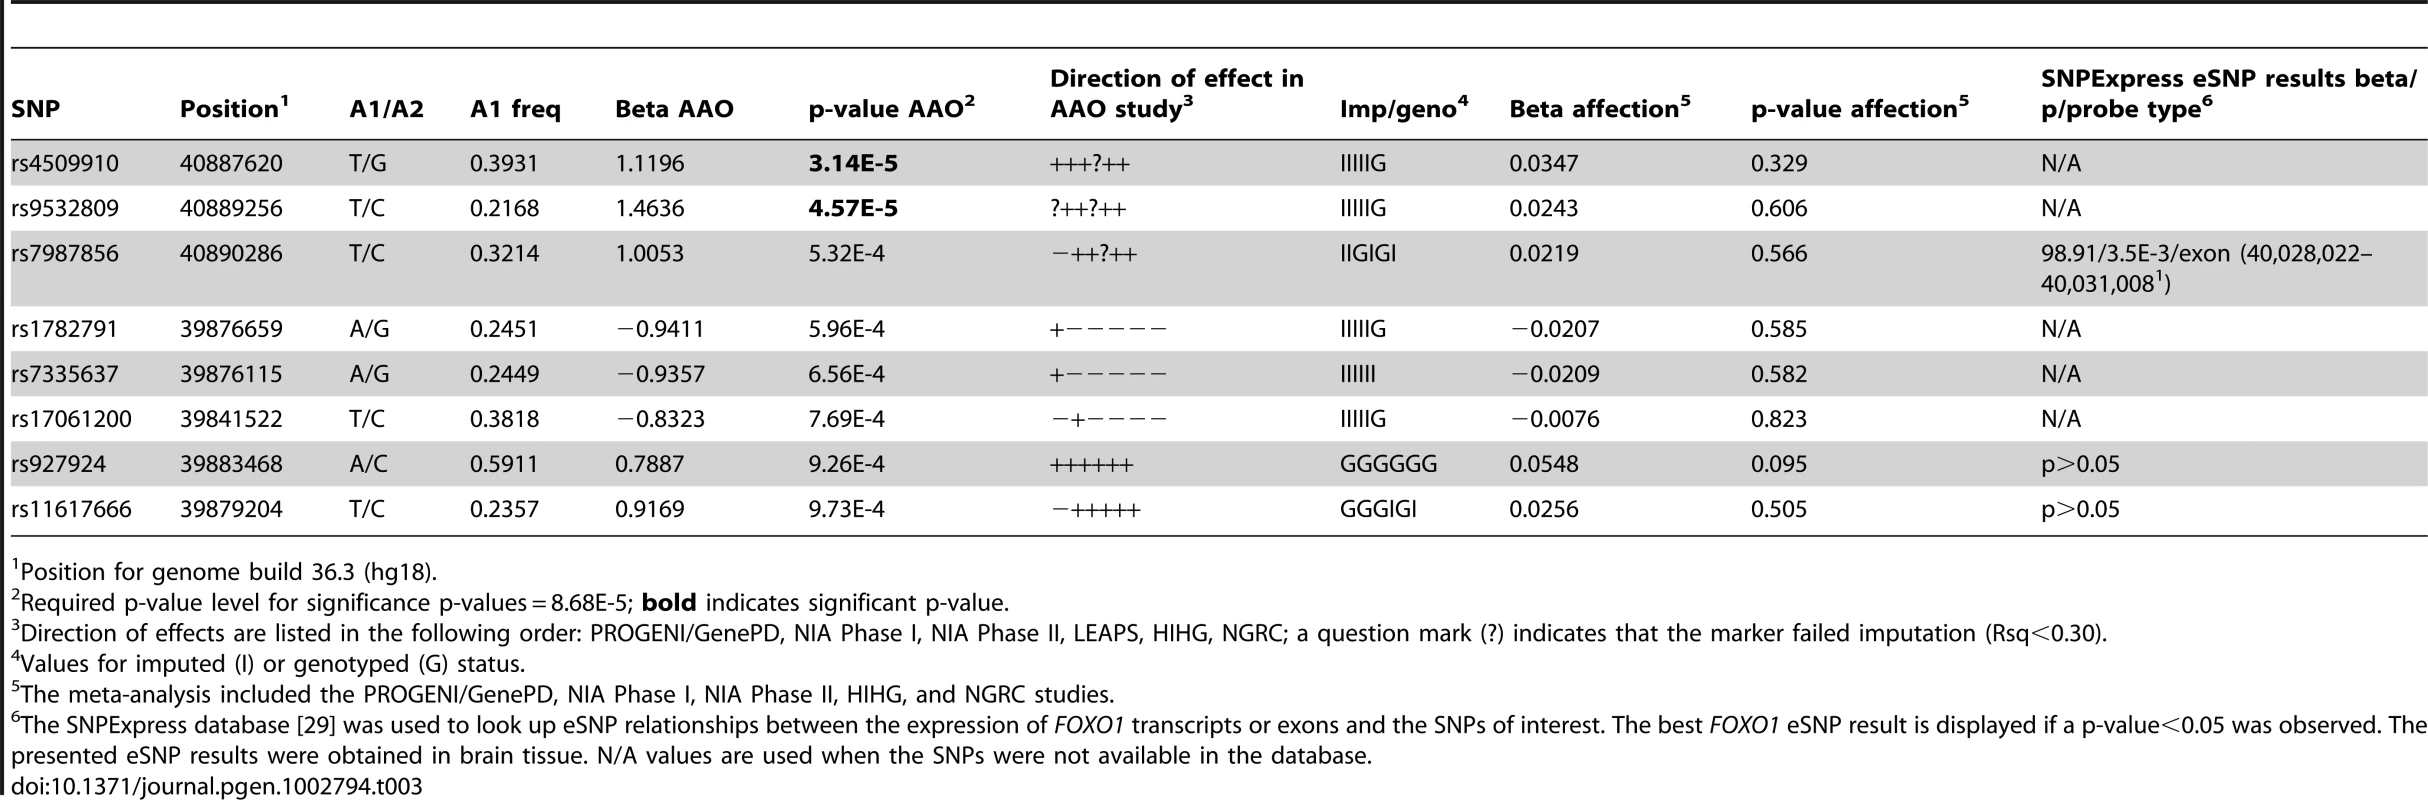 Top age at onset (AAO) meta-analysis results for the <i>FOXO1</i> region.